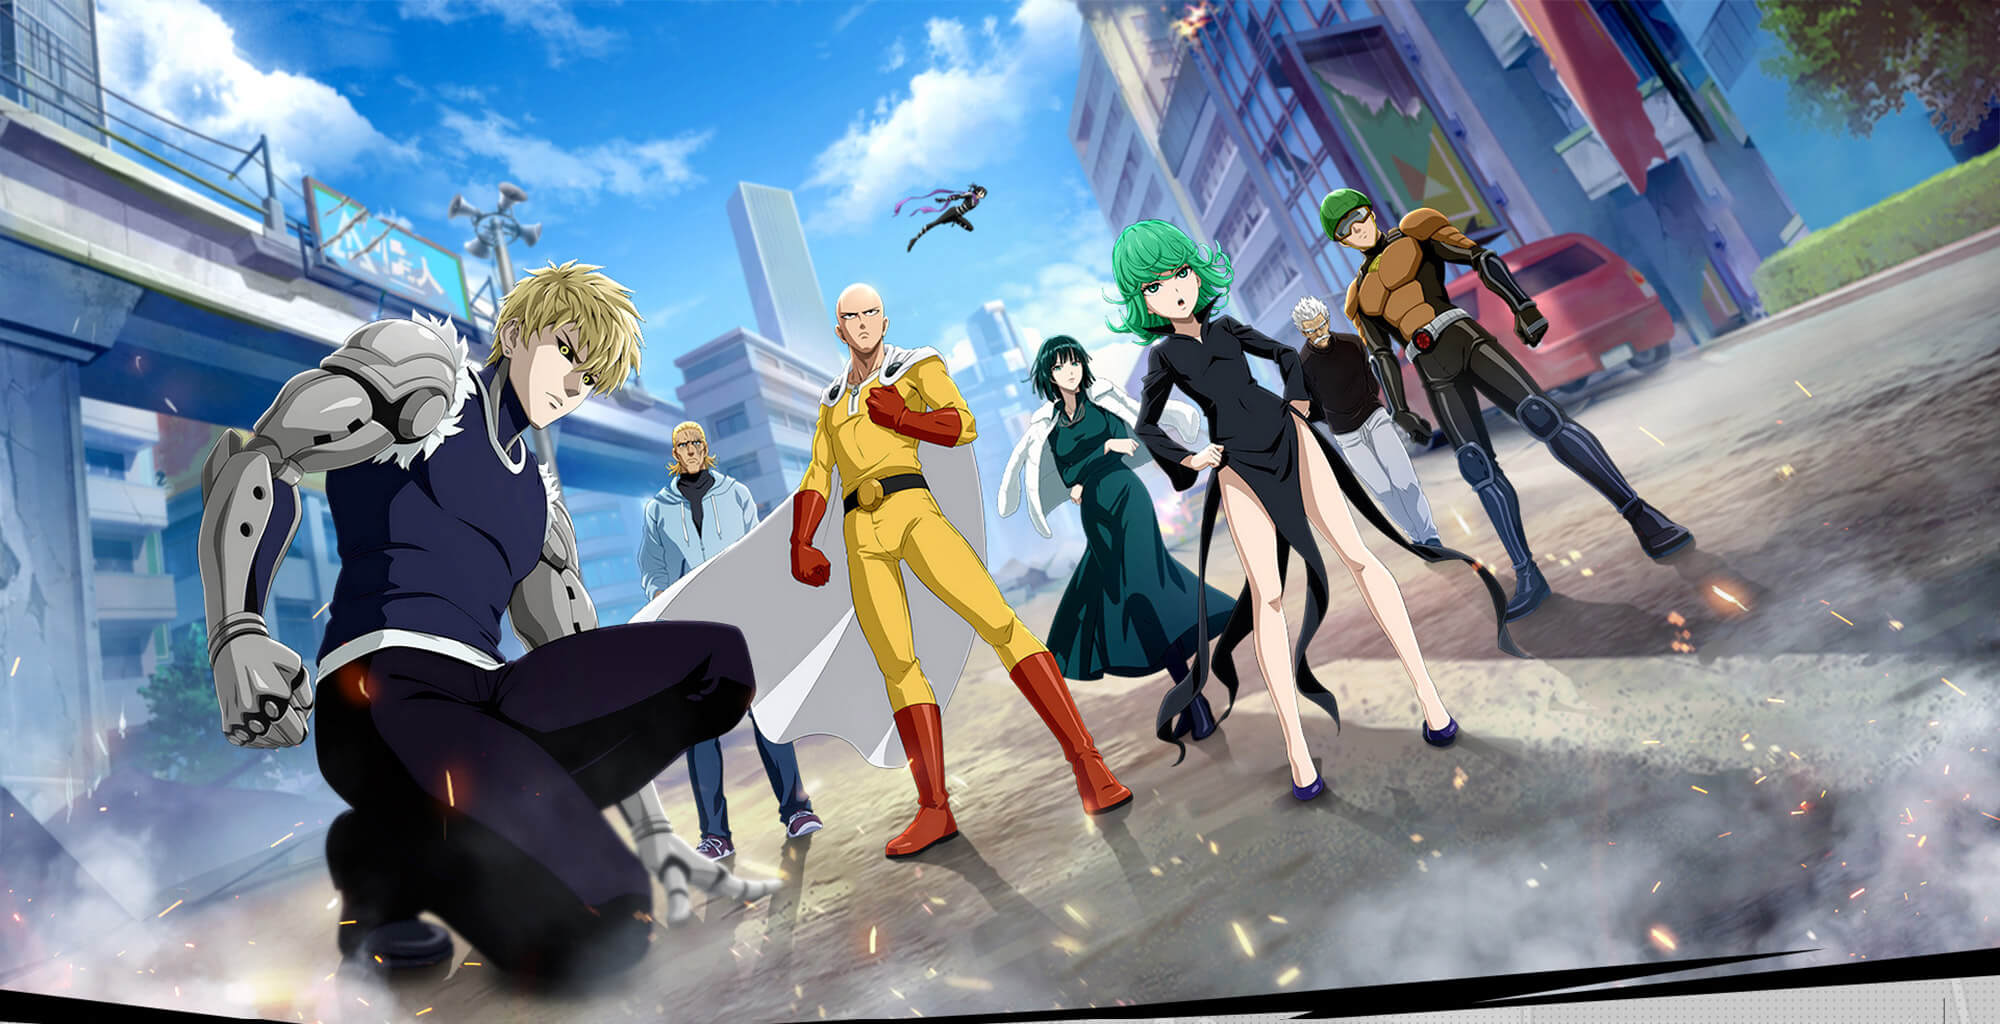 Cult Corner: 'One Punch Man' Is The Meta, Anti-Anime Anime You To Watch  Need Now | Decider